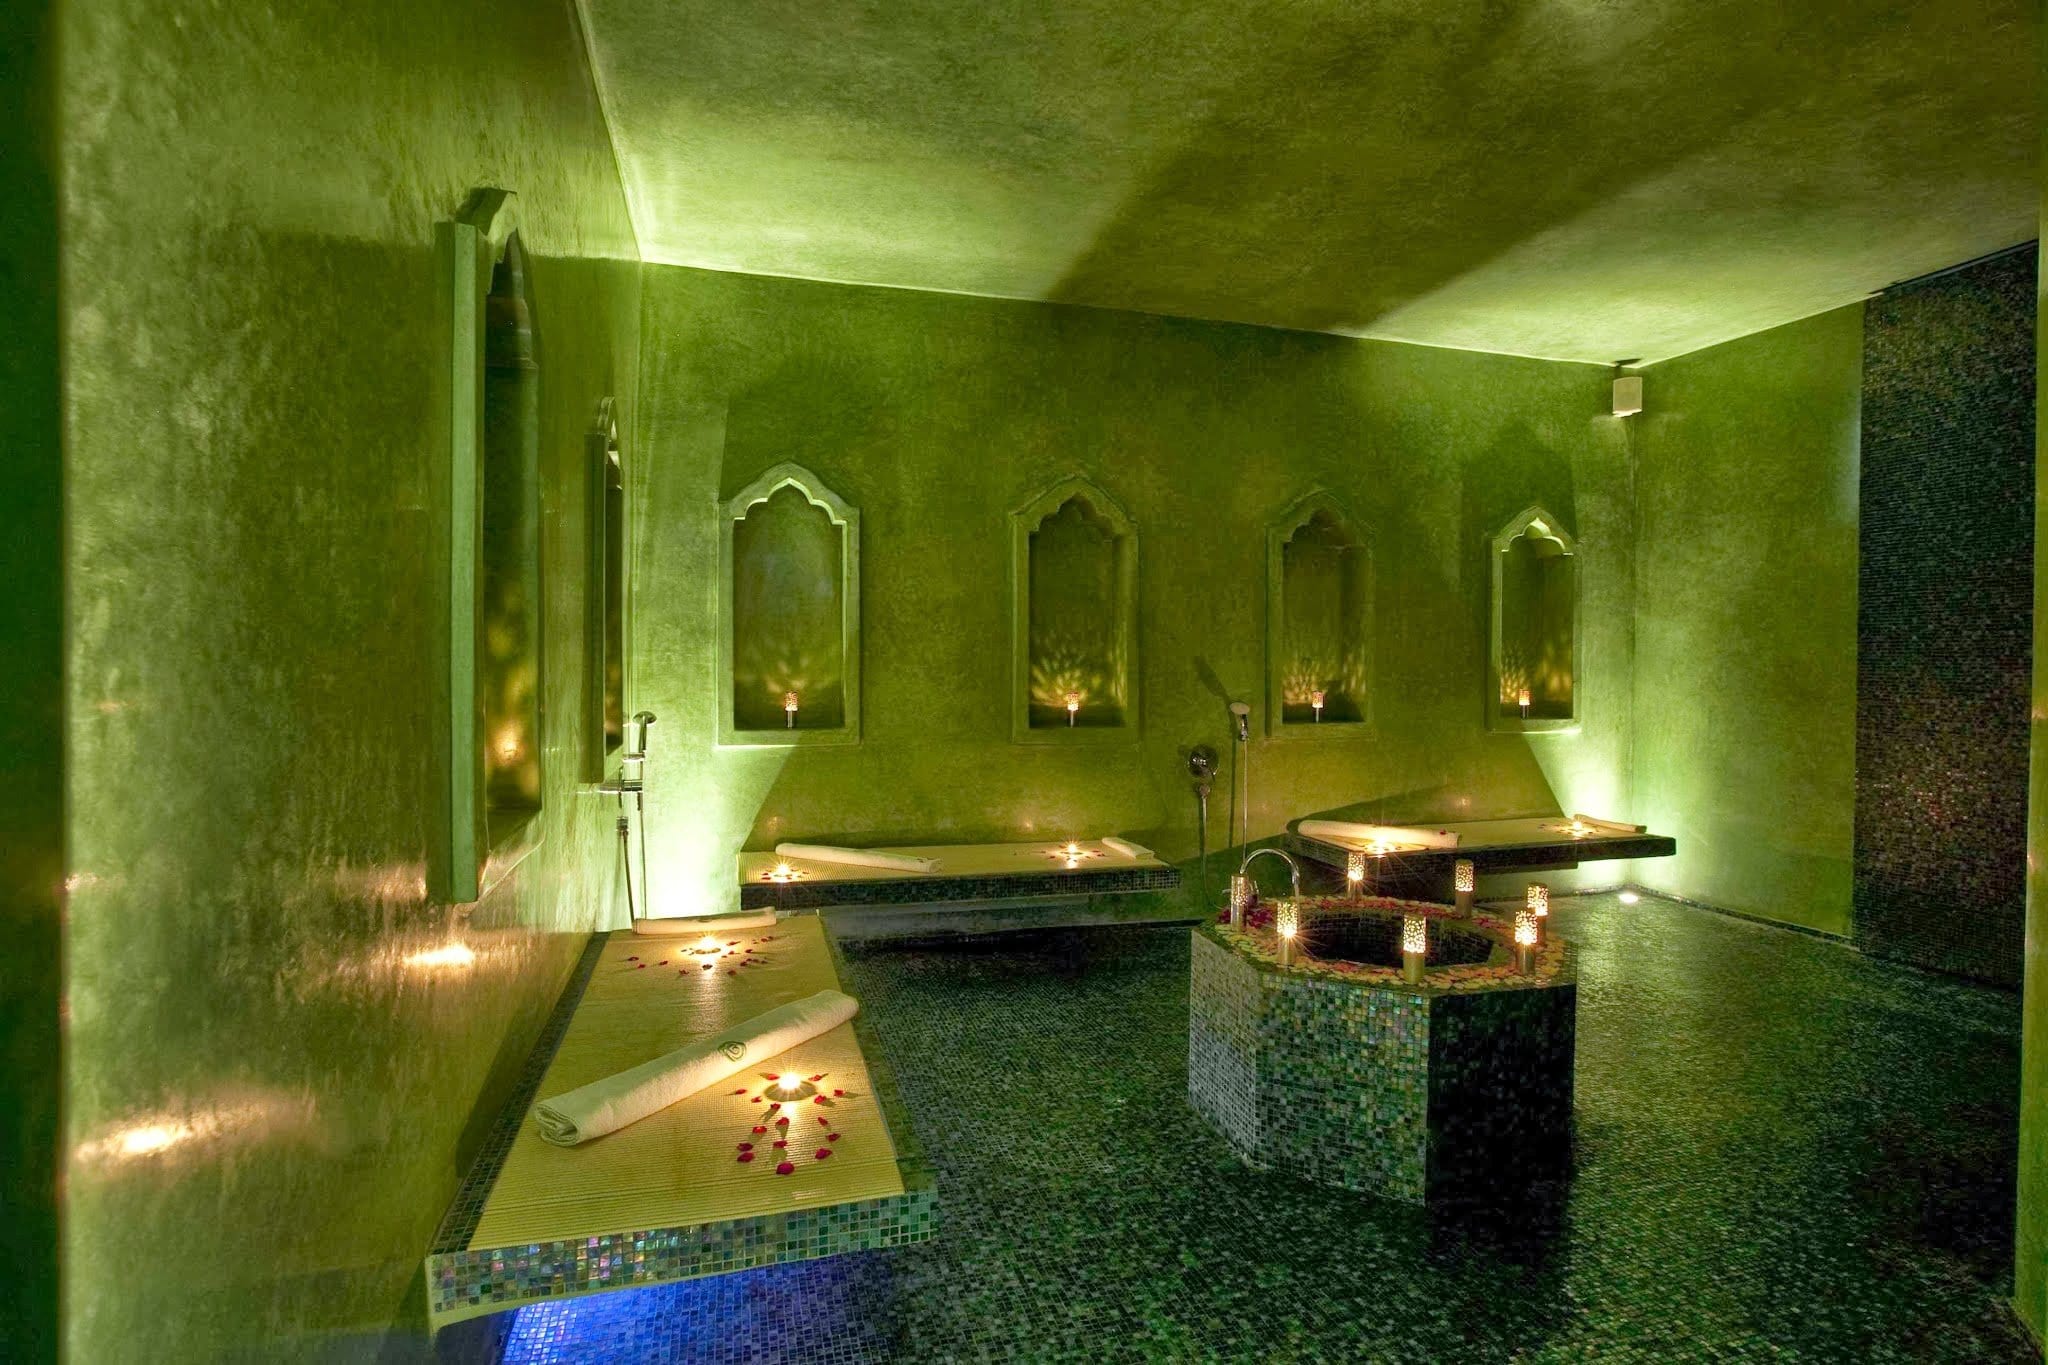 Top Reasons to Visit Marrakech: Hammam and Spas